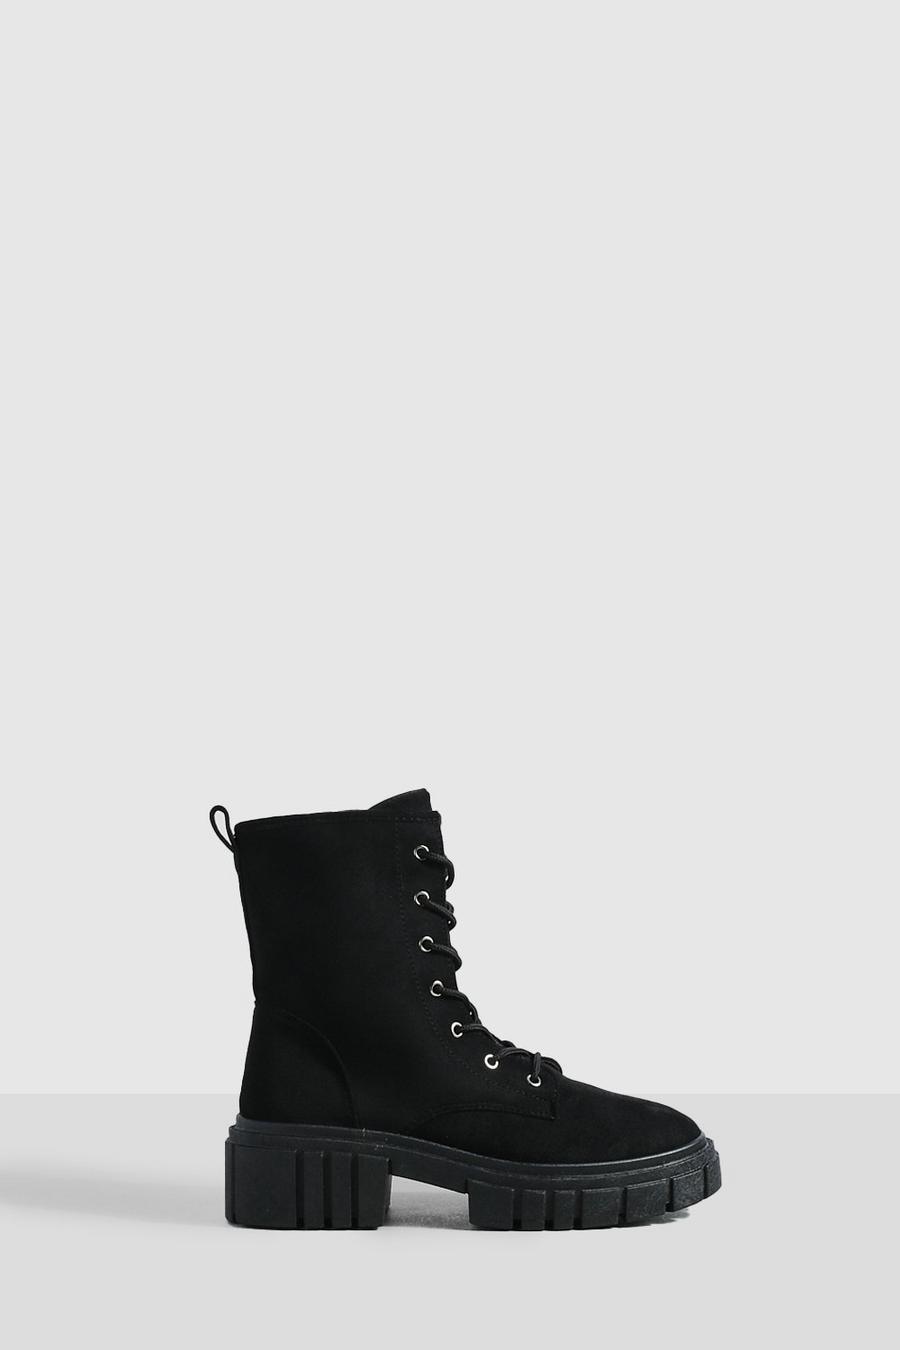 Black Cleated Sole Lace Up Hiker Boots